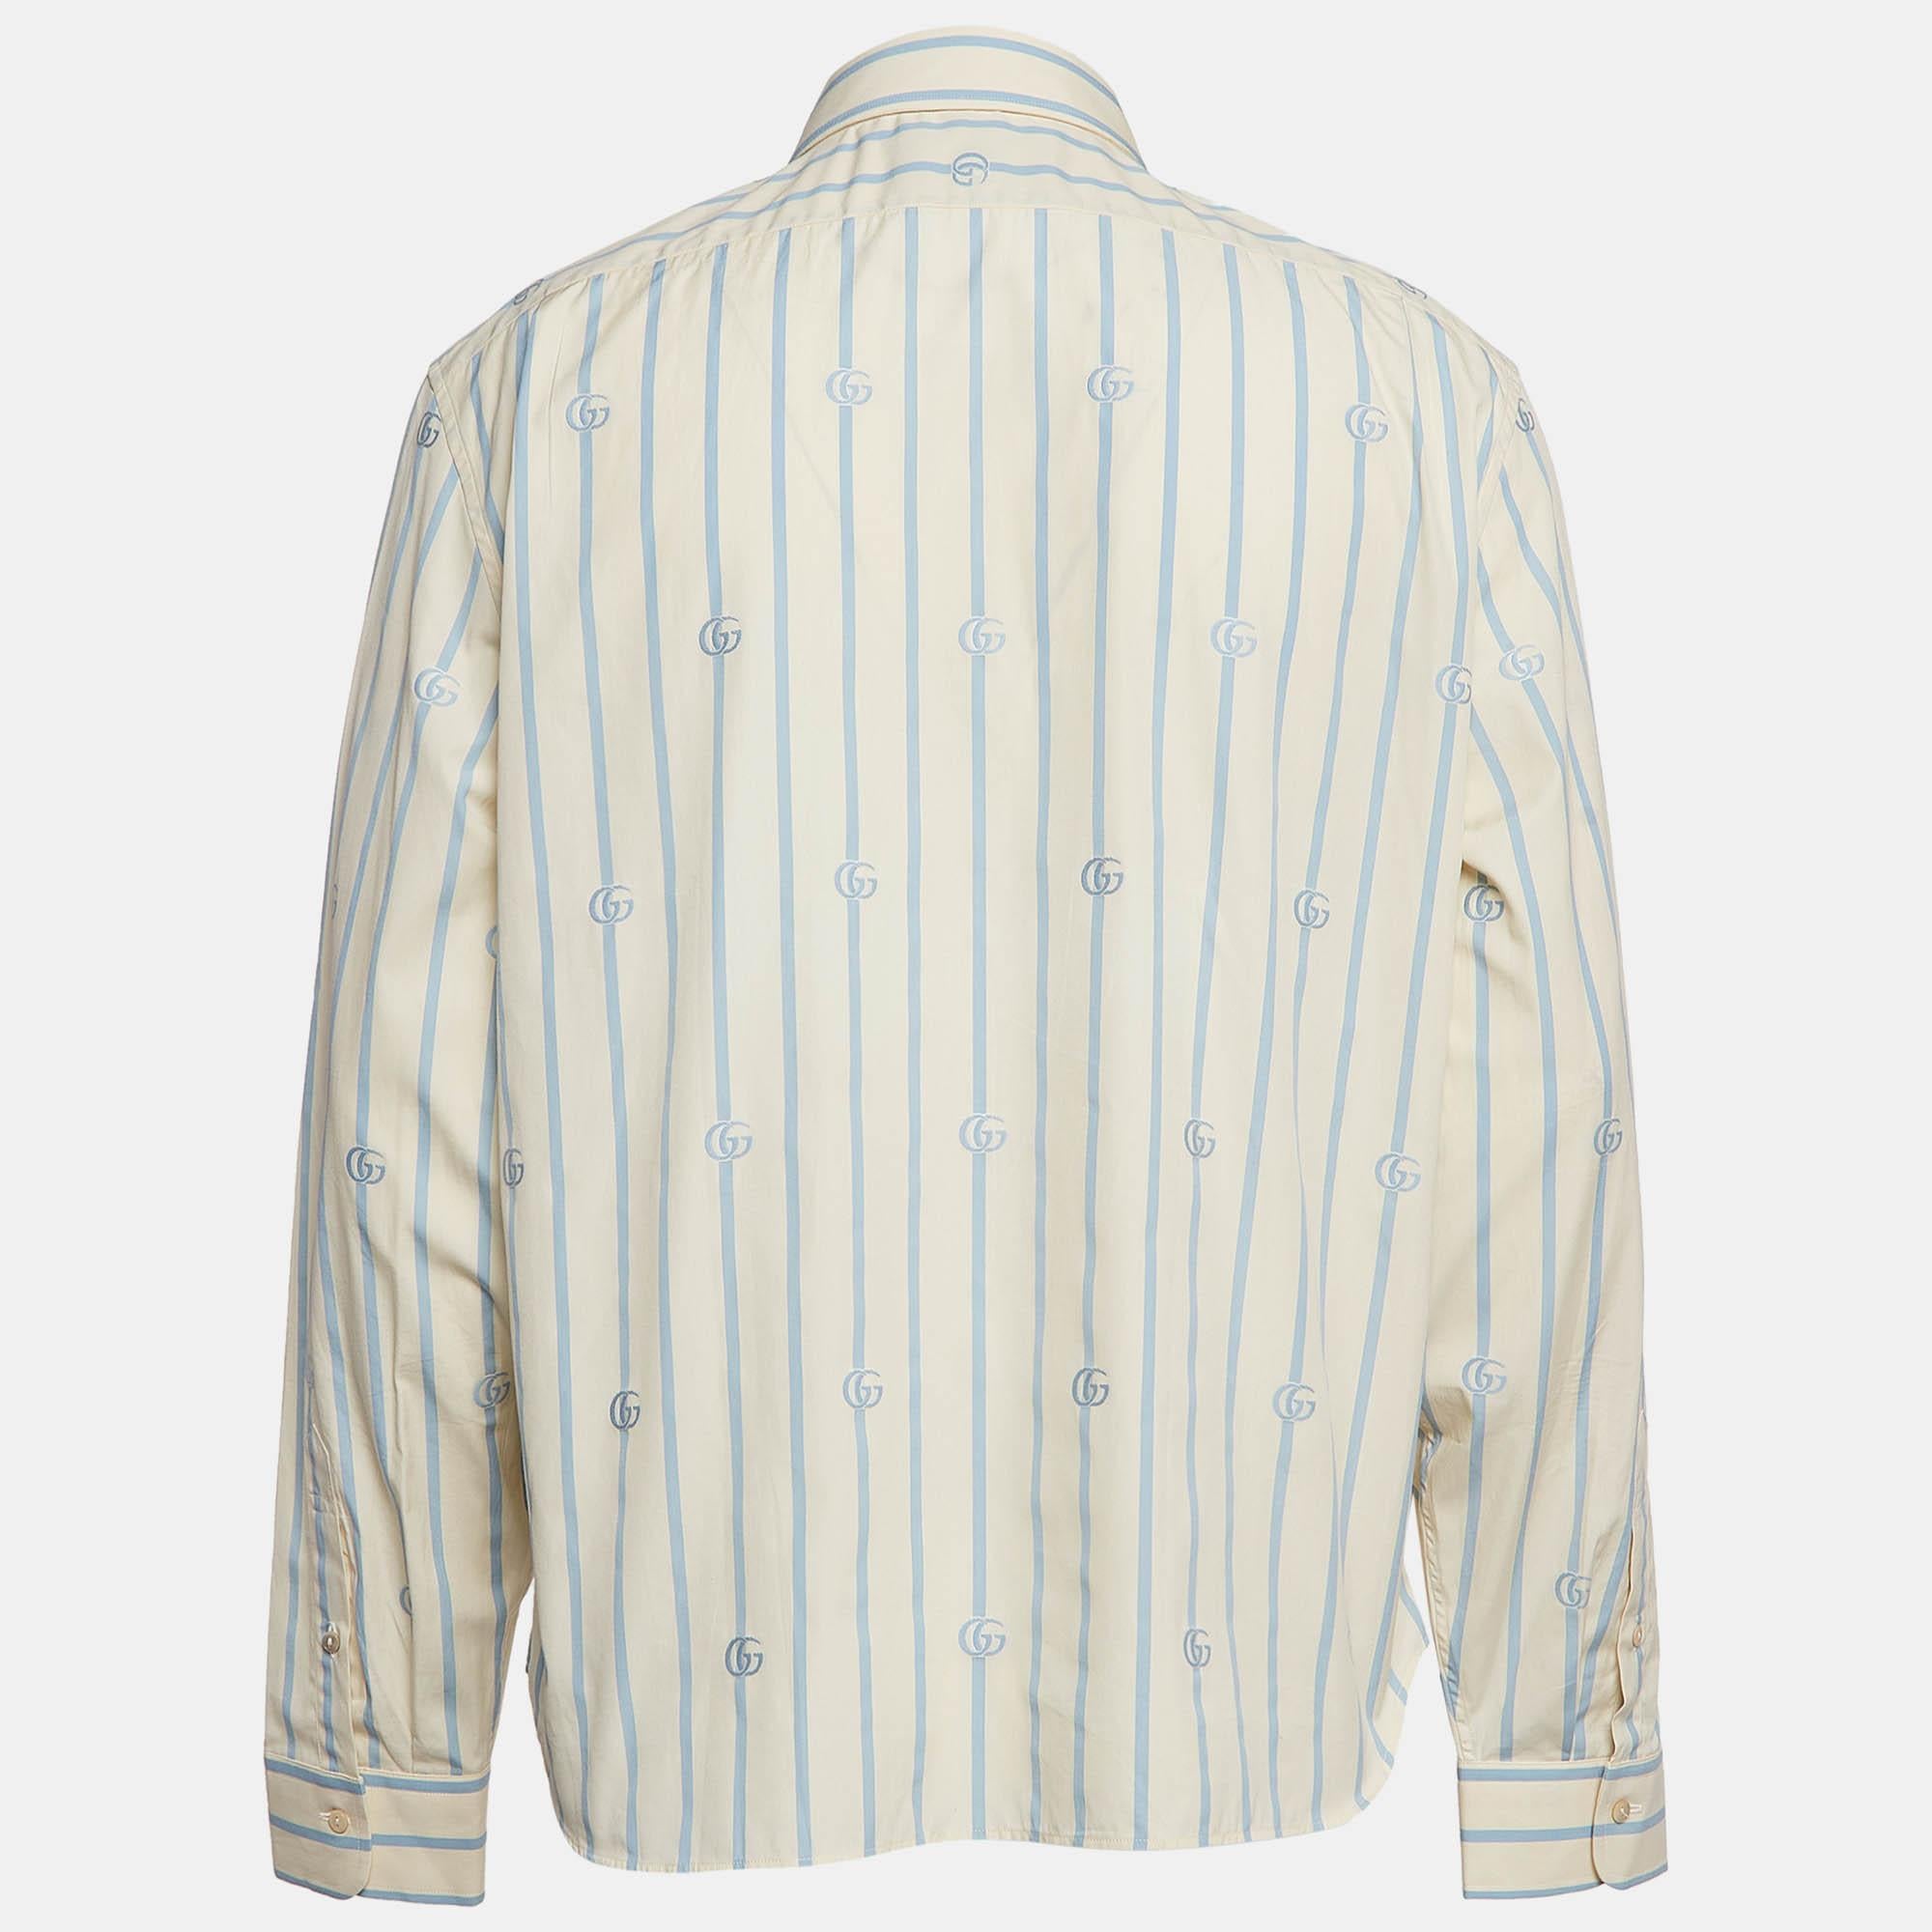 As shirts are an indispensable part of a wardrobe, Gucci brings you a creation that is both versatile and stylish. It has been tailored from high-quality fabric for a classy look and fit.

